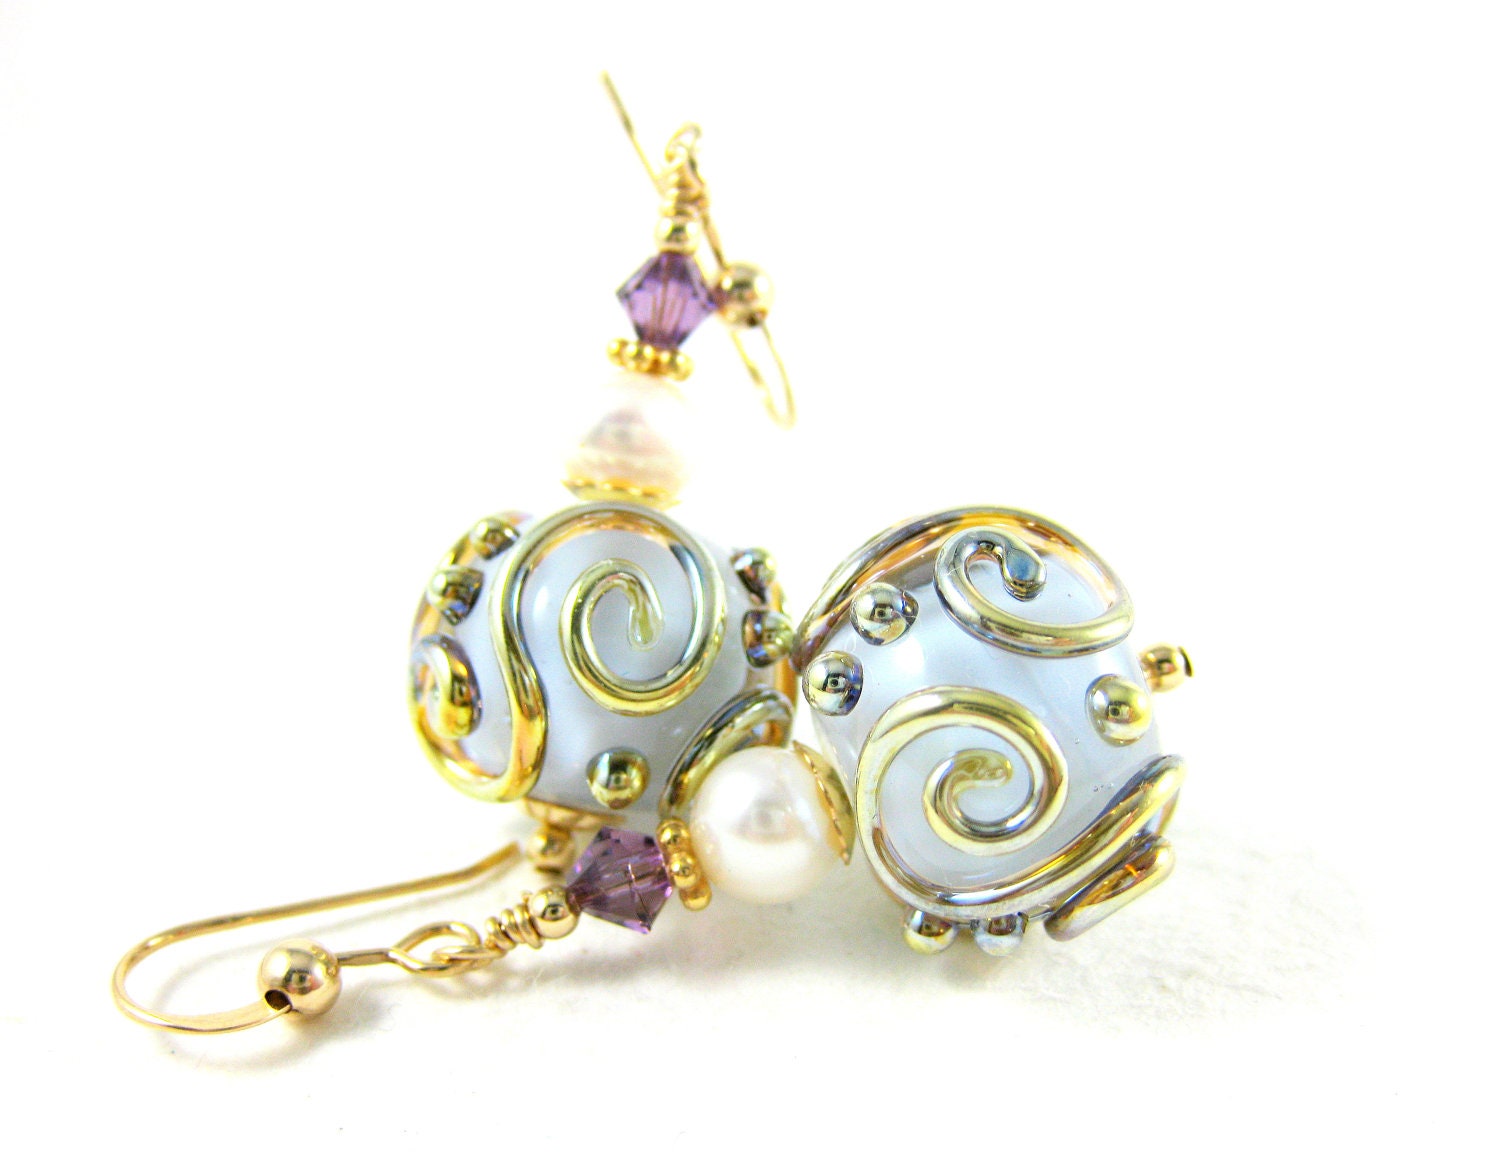 Pale Purple Glass Earrings, Lilac Gold Lampwork Glass Bead Earrings, Pearl Earrings, Purple Earrings - Hint of Lilac